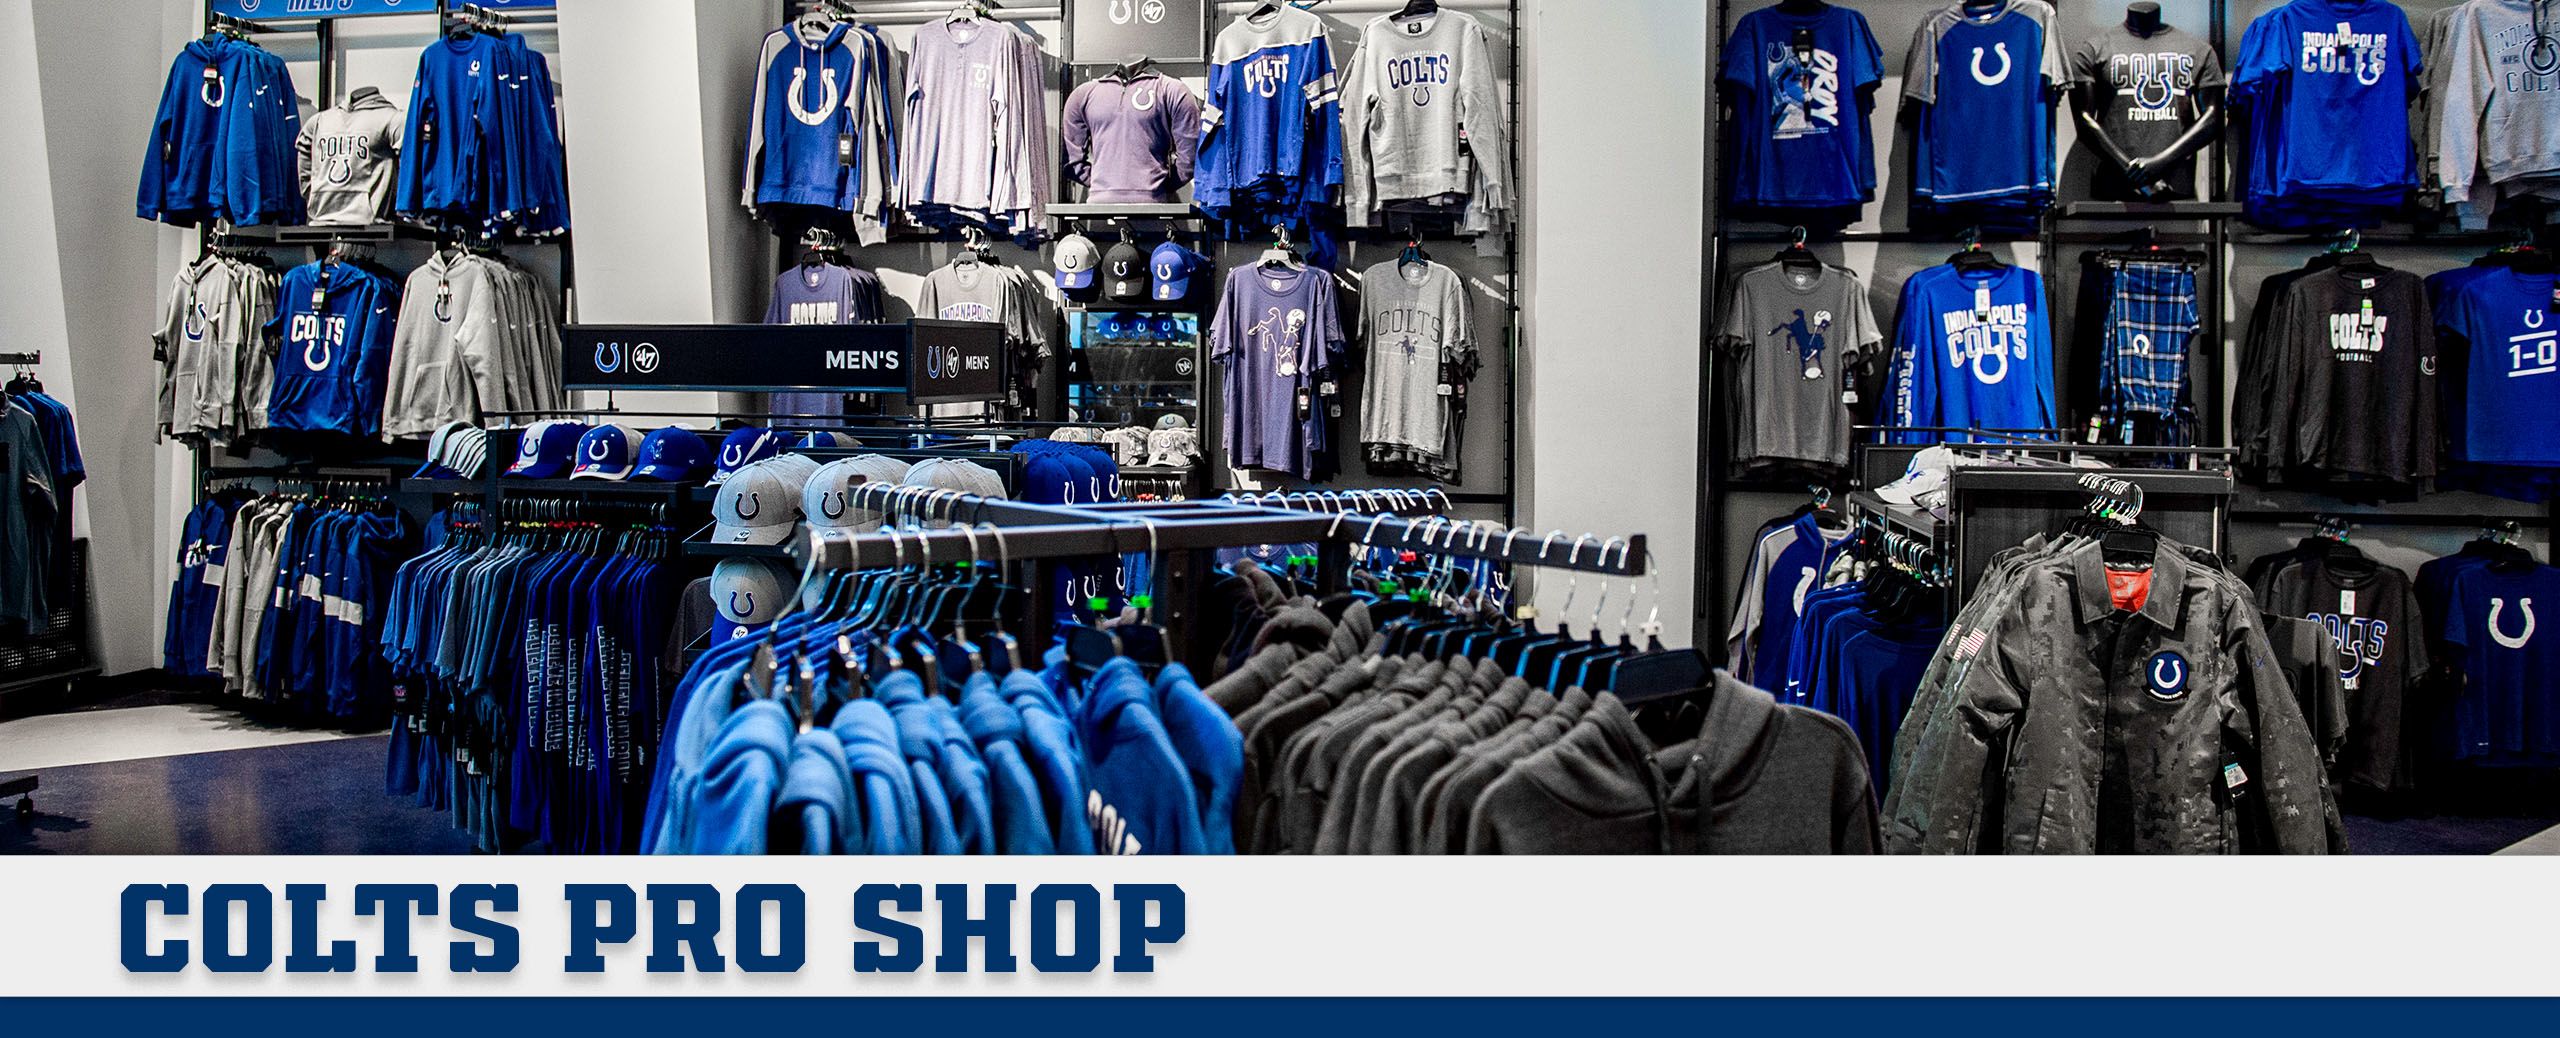 places that sell nfl gear near me